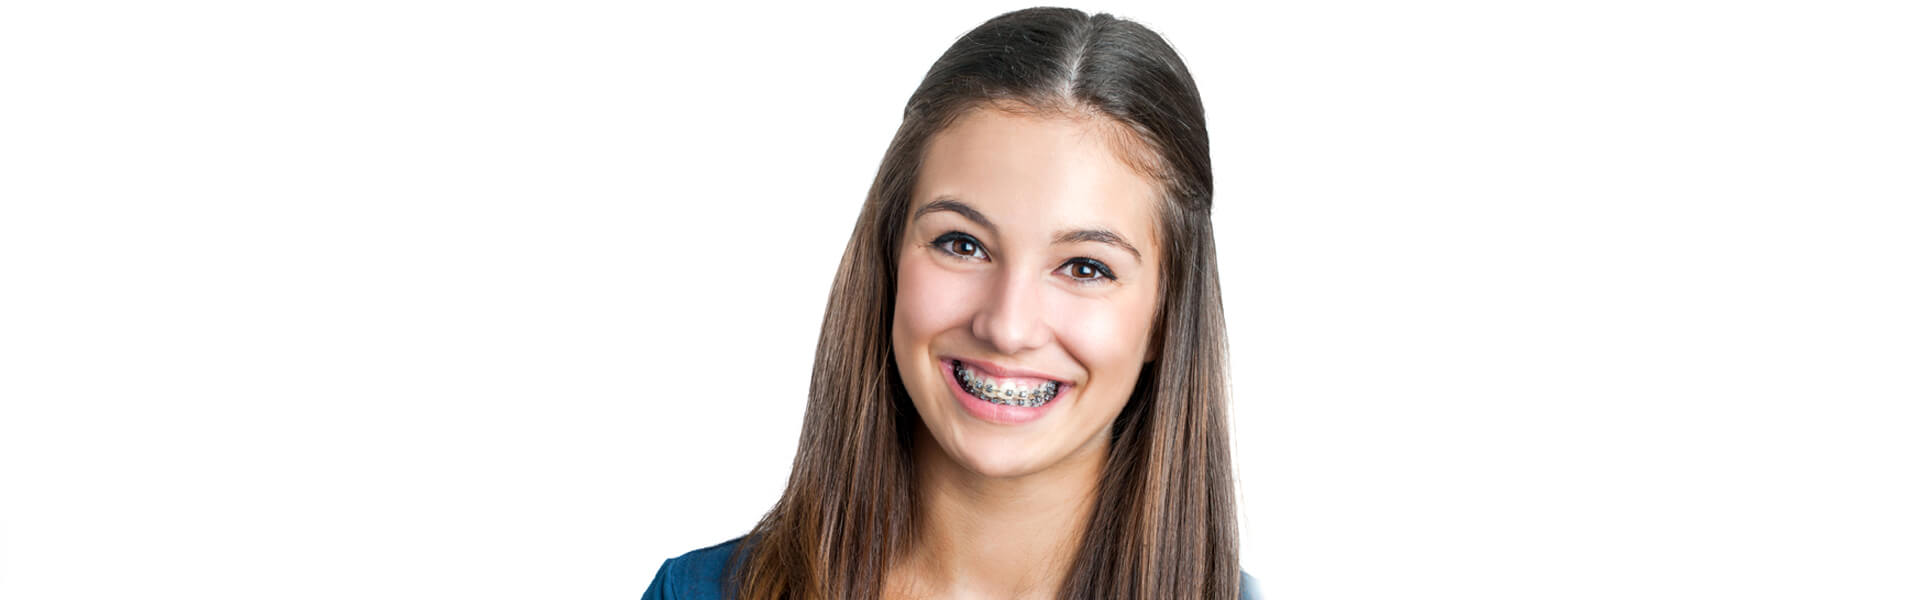 4 Types of Orthodontic Treatment That Can Straighten Your Smile